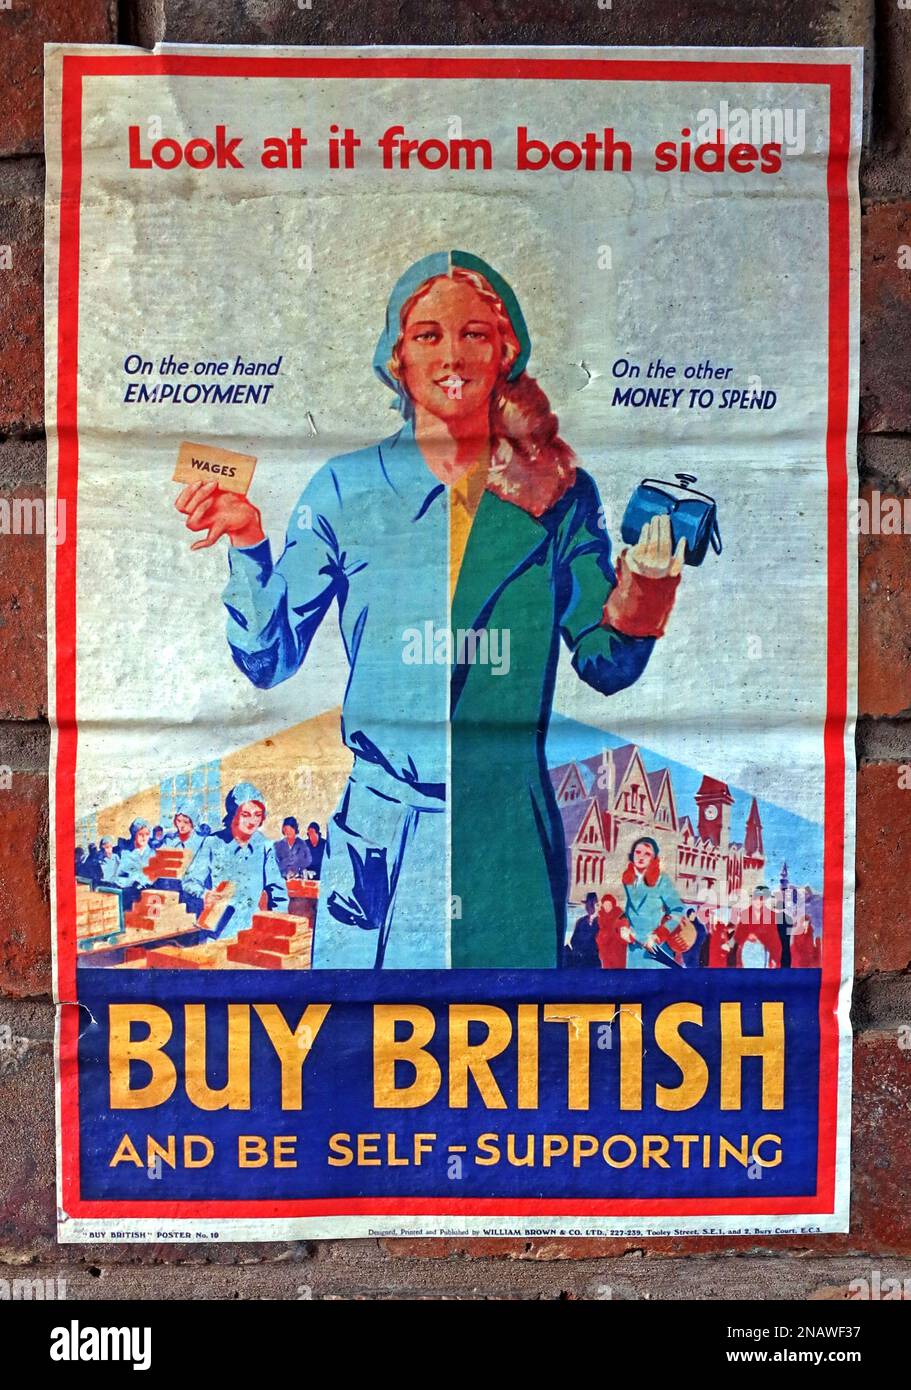 Poster - Buy British, and be self-supporting, Look at it from both sides, Employment, Money to spend Stock Photo